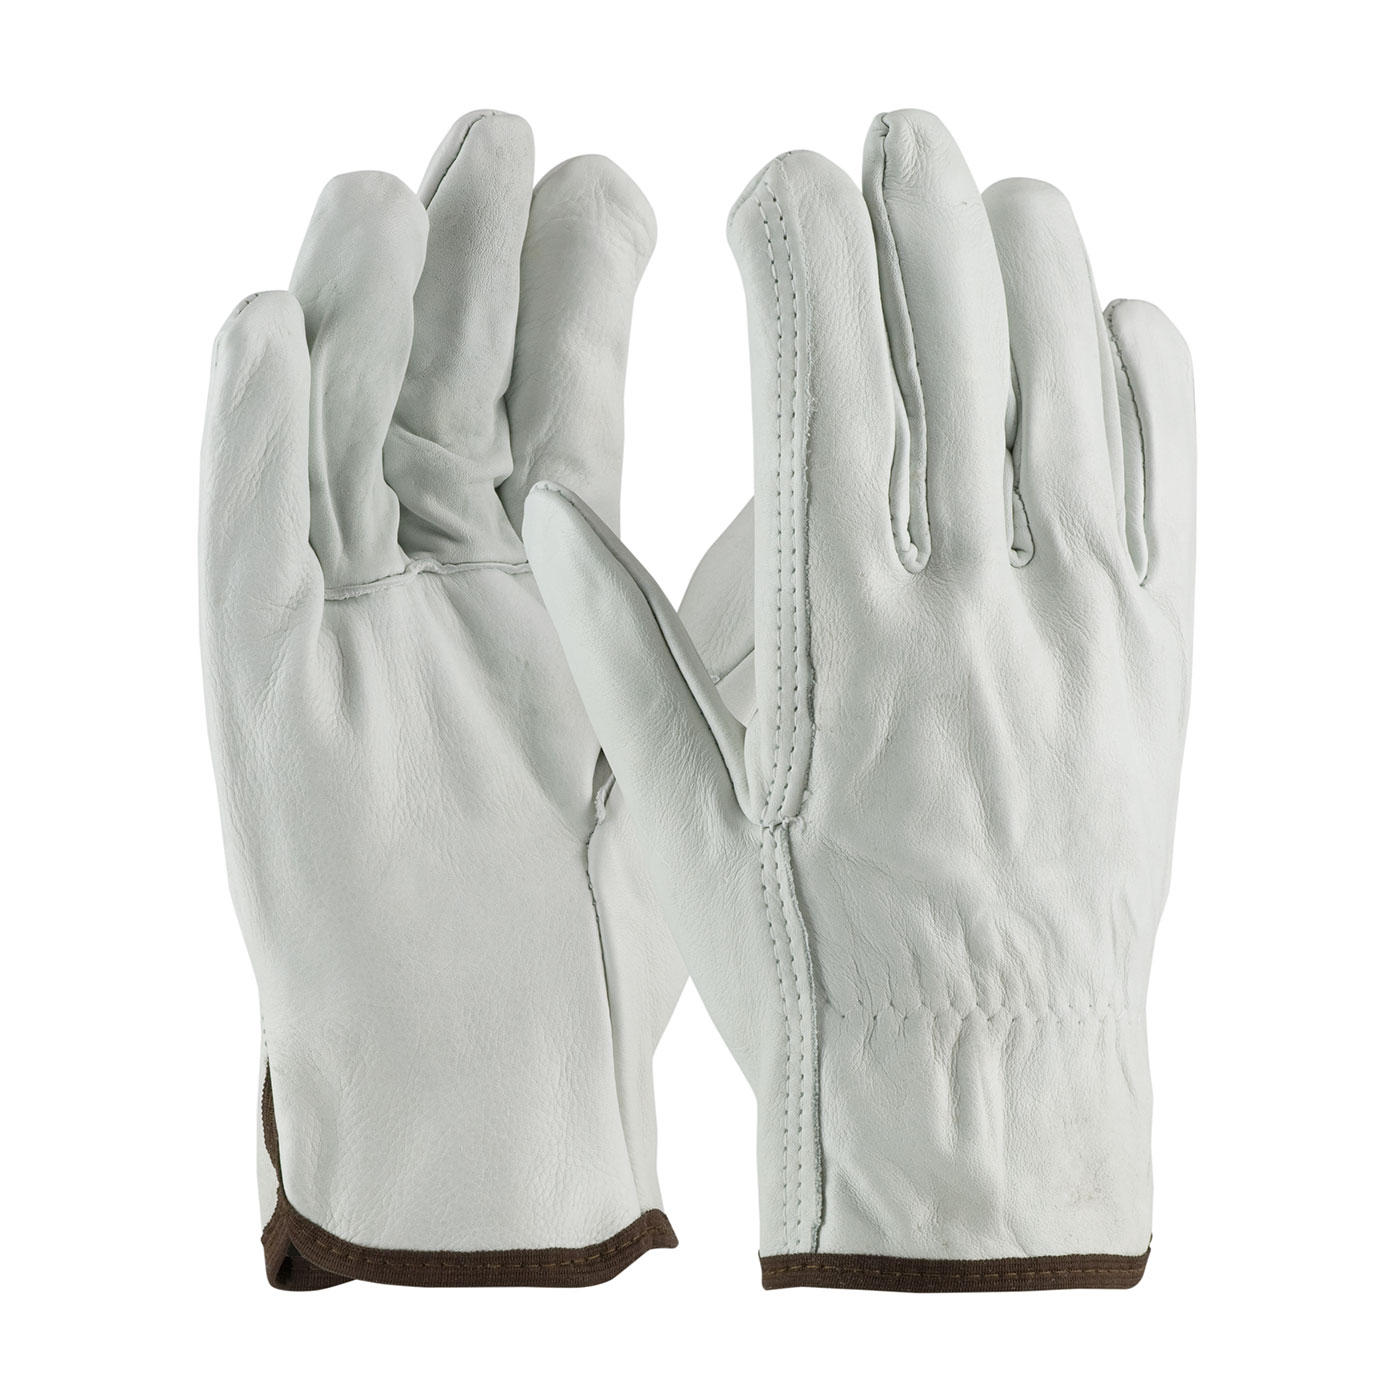 PIP 68-101/L Superior Grade Top Grain Cowhide Leather Drivers Glove - Straight Thumb - Large PID-68 101 L